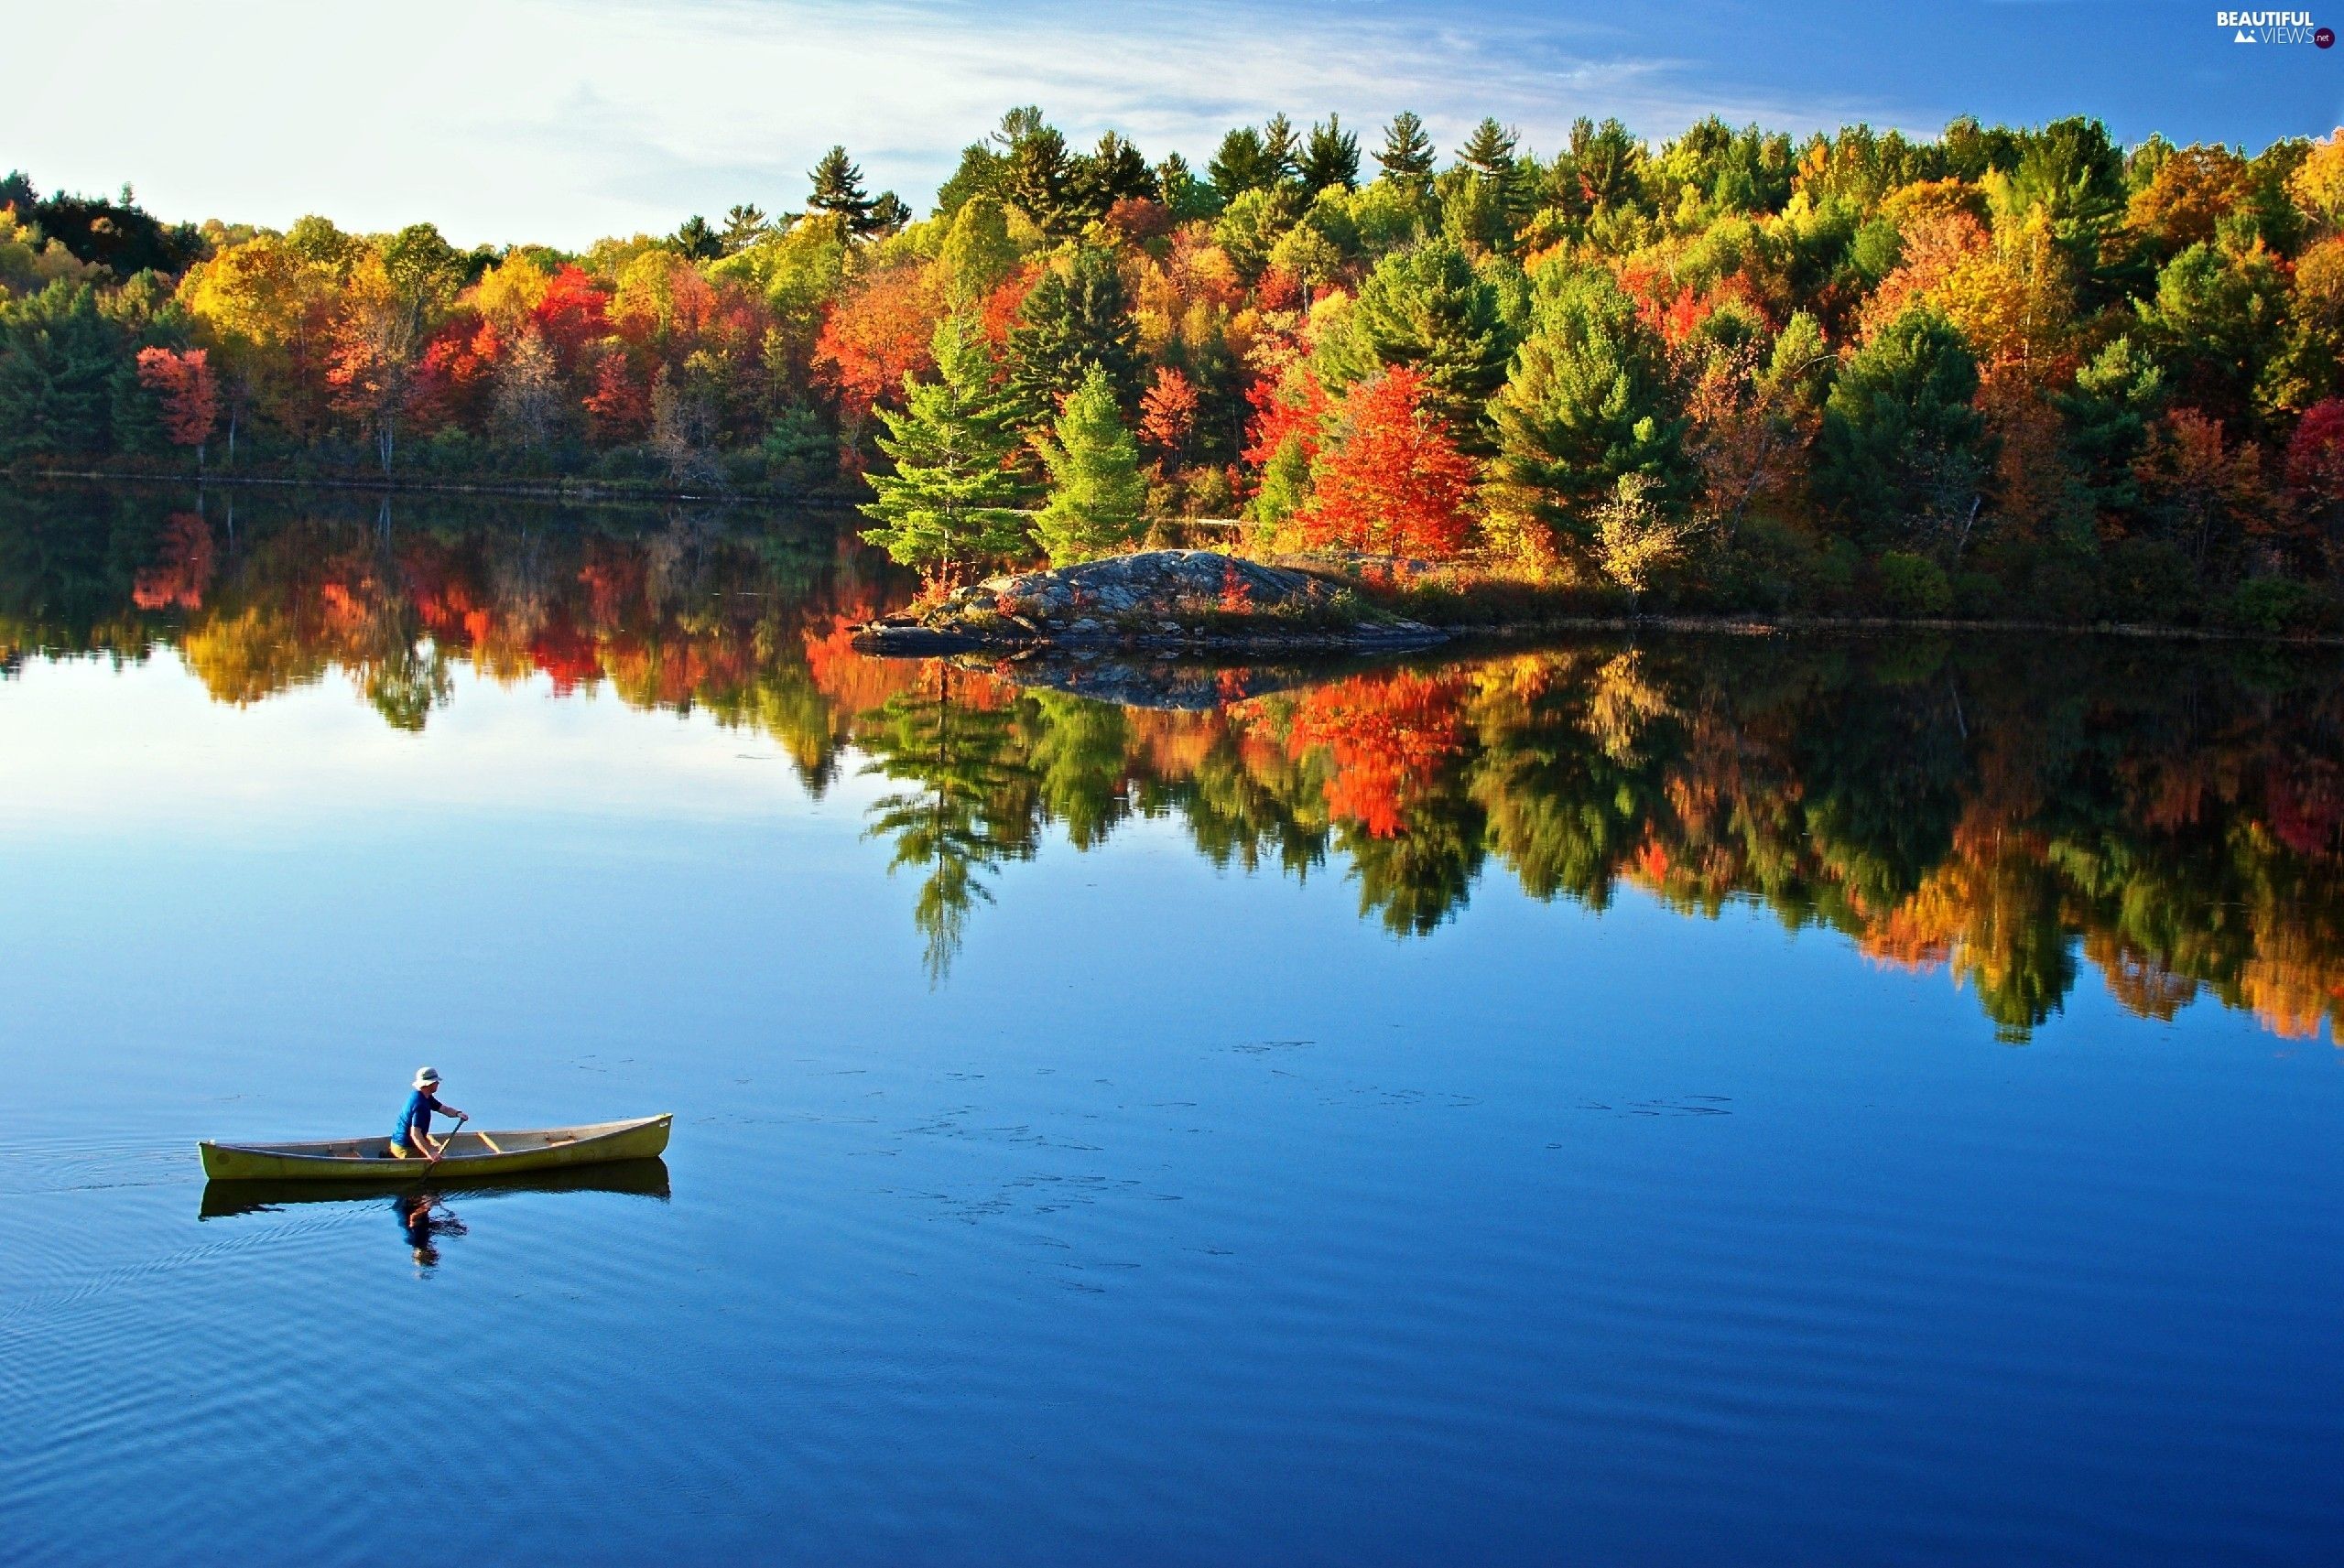 Boat, forest, autumn, lake views wallpaper: 2560x1713